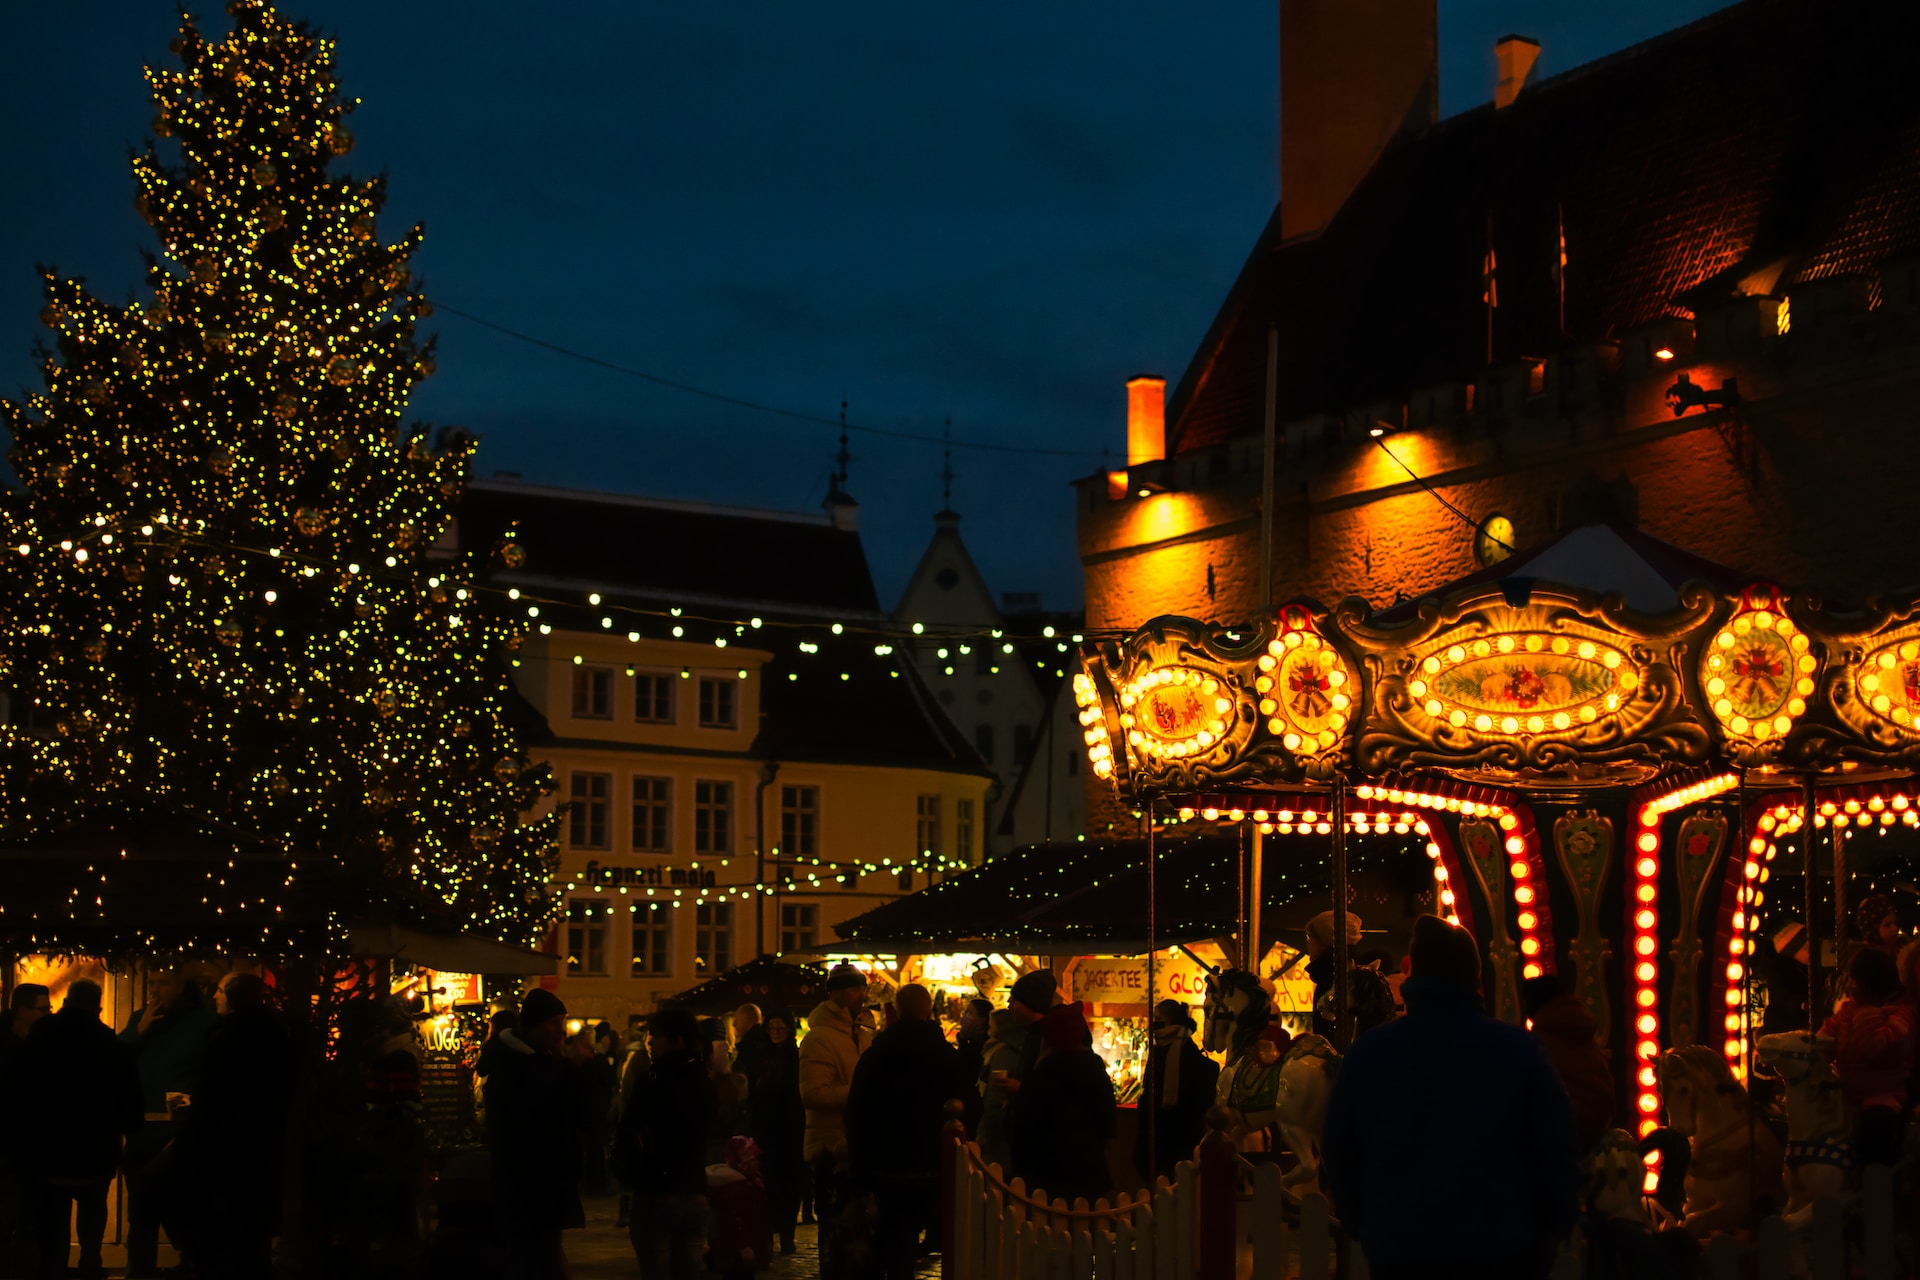 Christmas Eve in Estonia is a time of community.